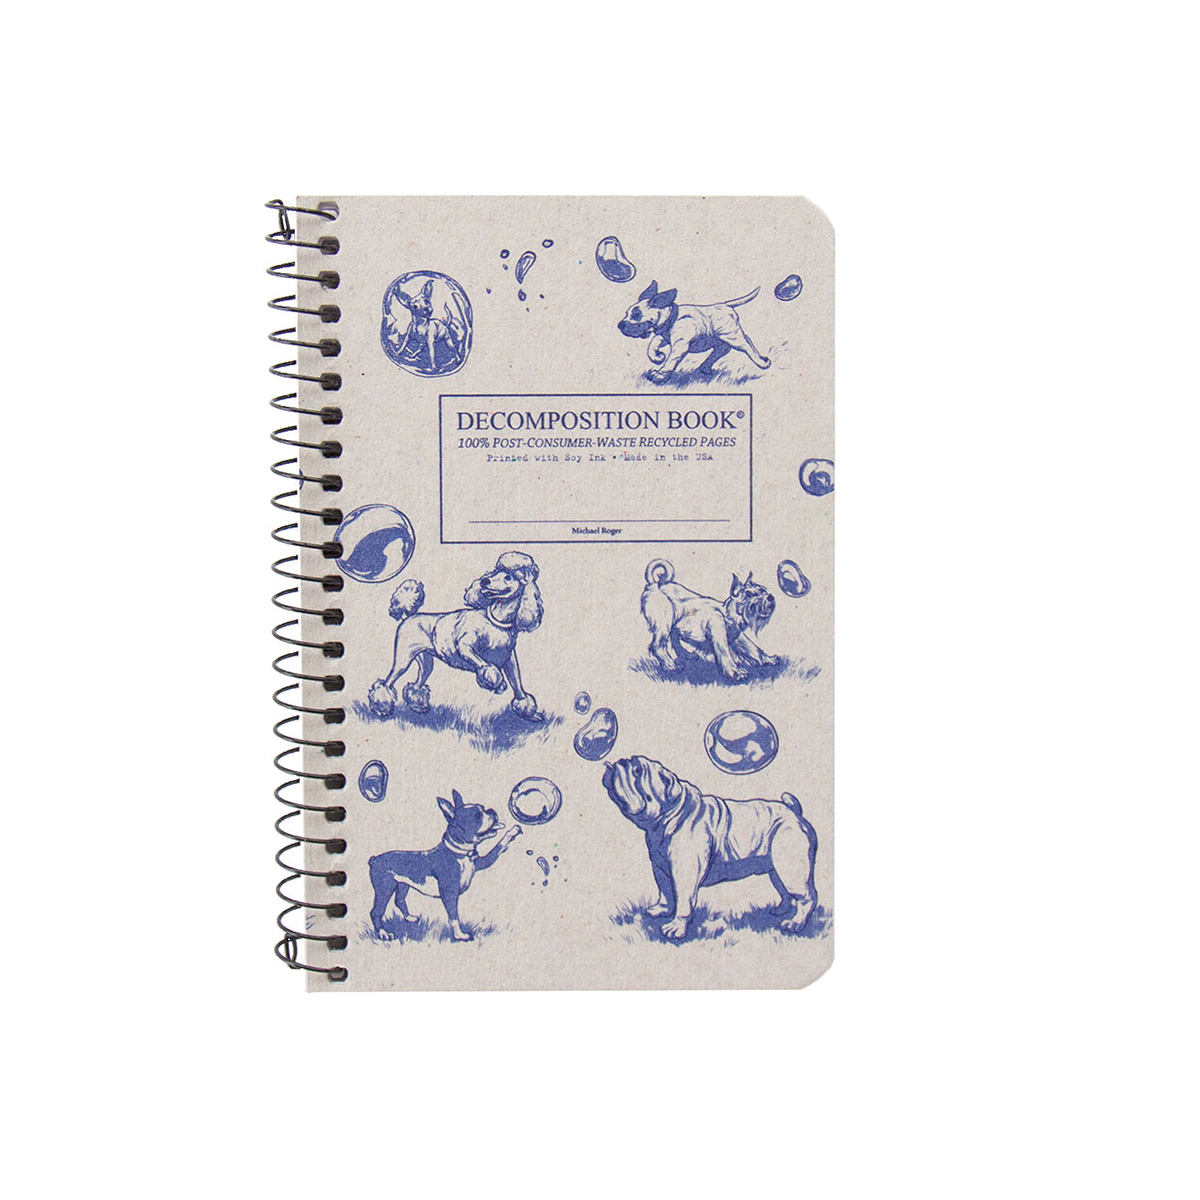 Decomposition 20383 Dogs and Bubbles Book, College Ruled, Lined Sheet, 6-1/4 x 4 in Sheet, 60-Sheet, Spiral Binding - 1